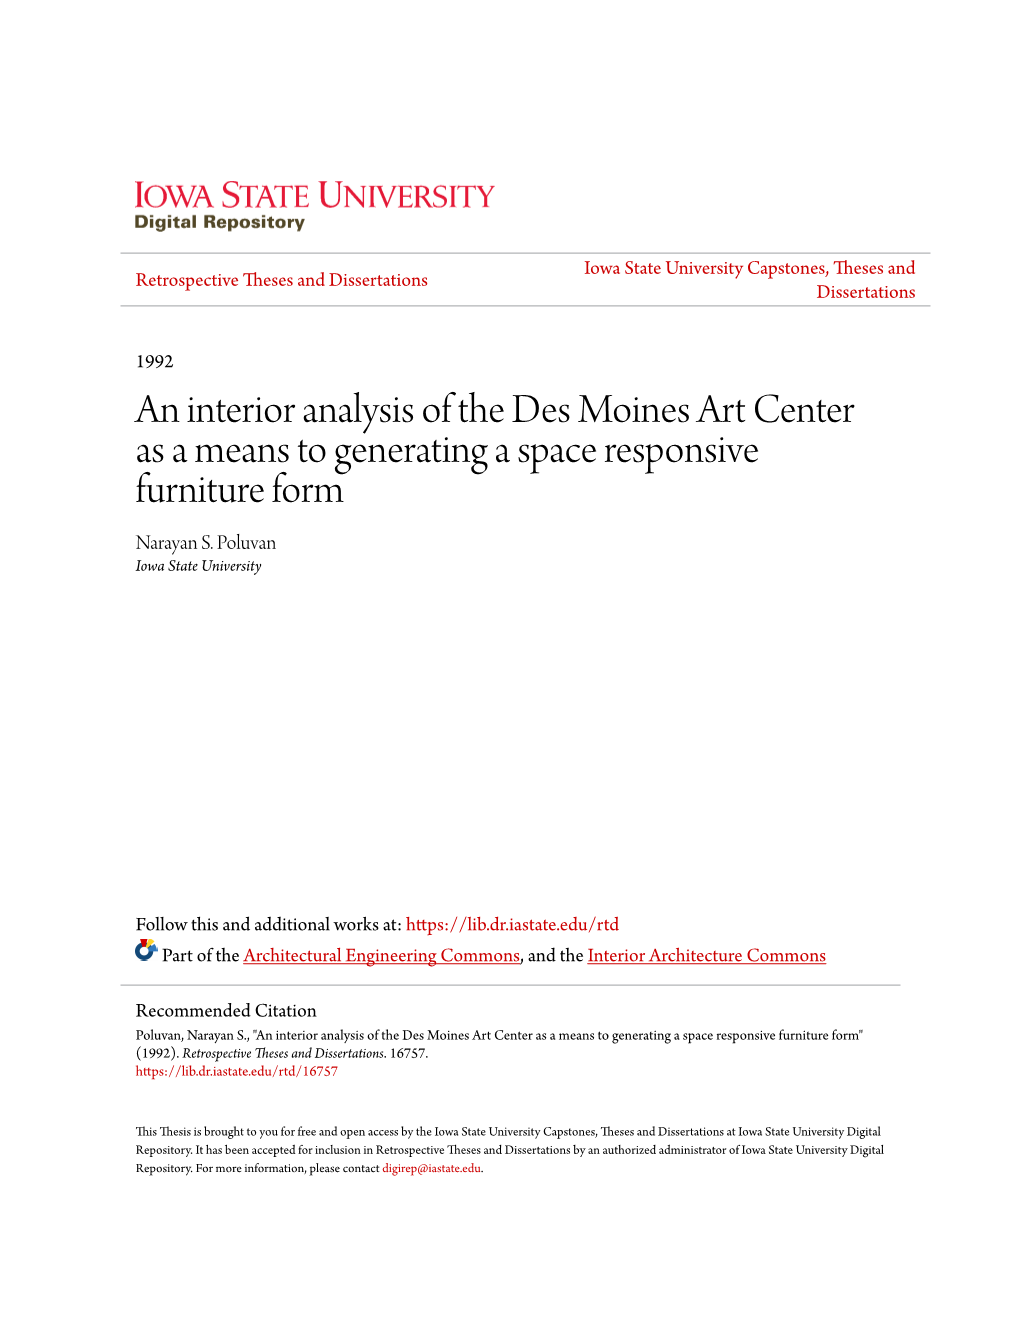 An Interior Analysis of the Des Moines Art Center As a Means to Generating a Space Responsive Furniture Form Narayan S